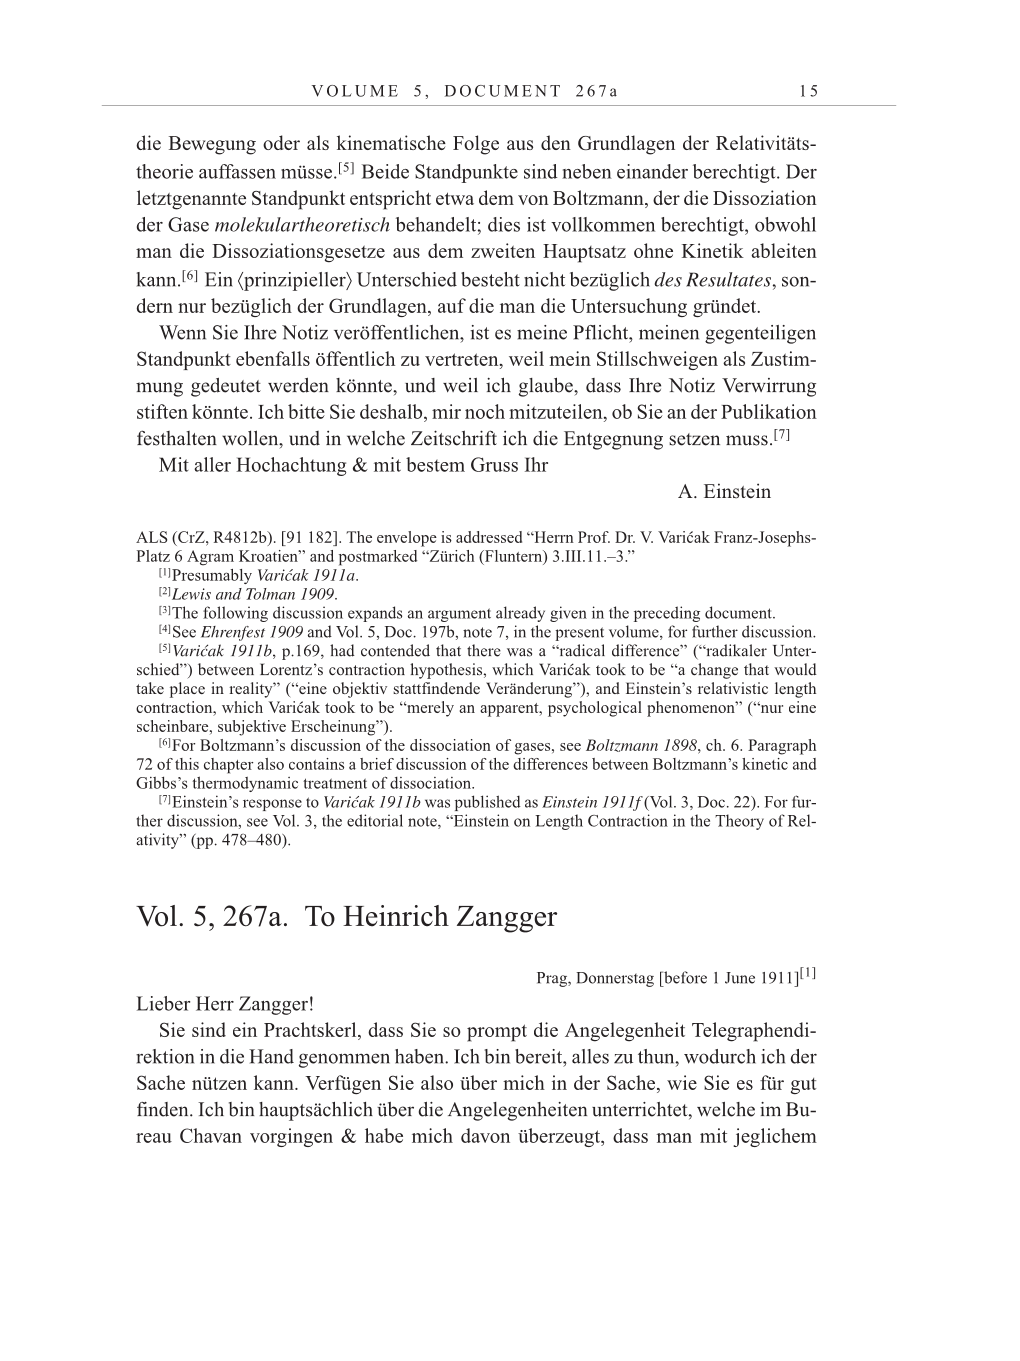 Volume 10: The Berlin Years: Correspondence May-December 1920 / Supplementary Correspondence 1909-1920 page 15